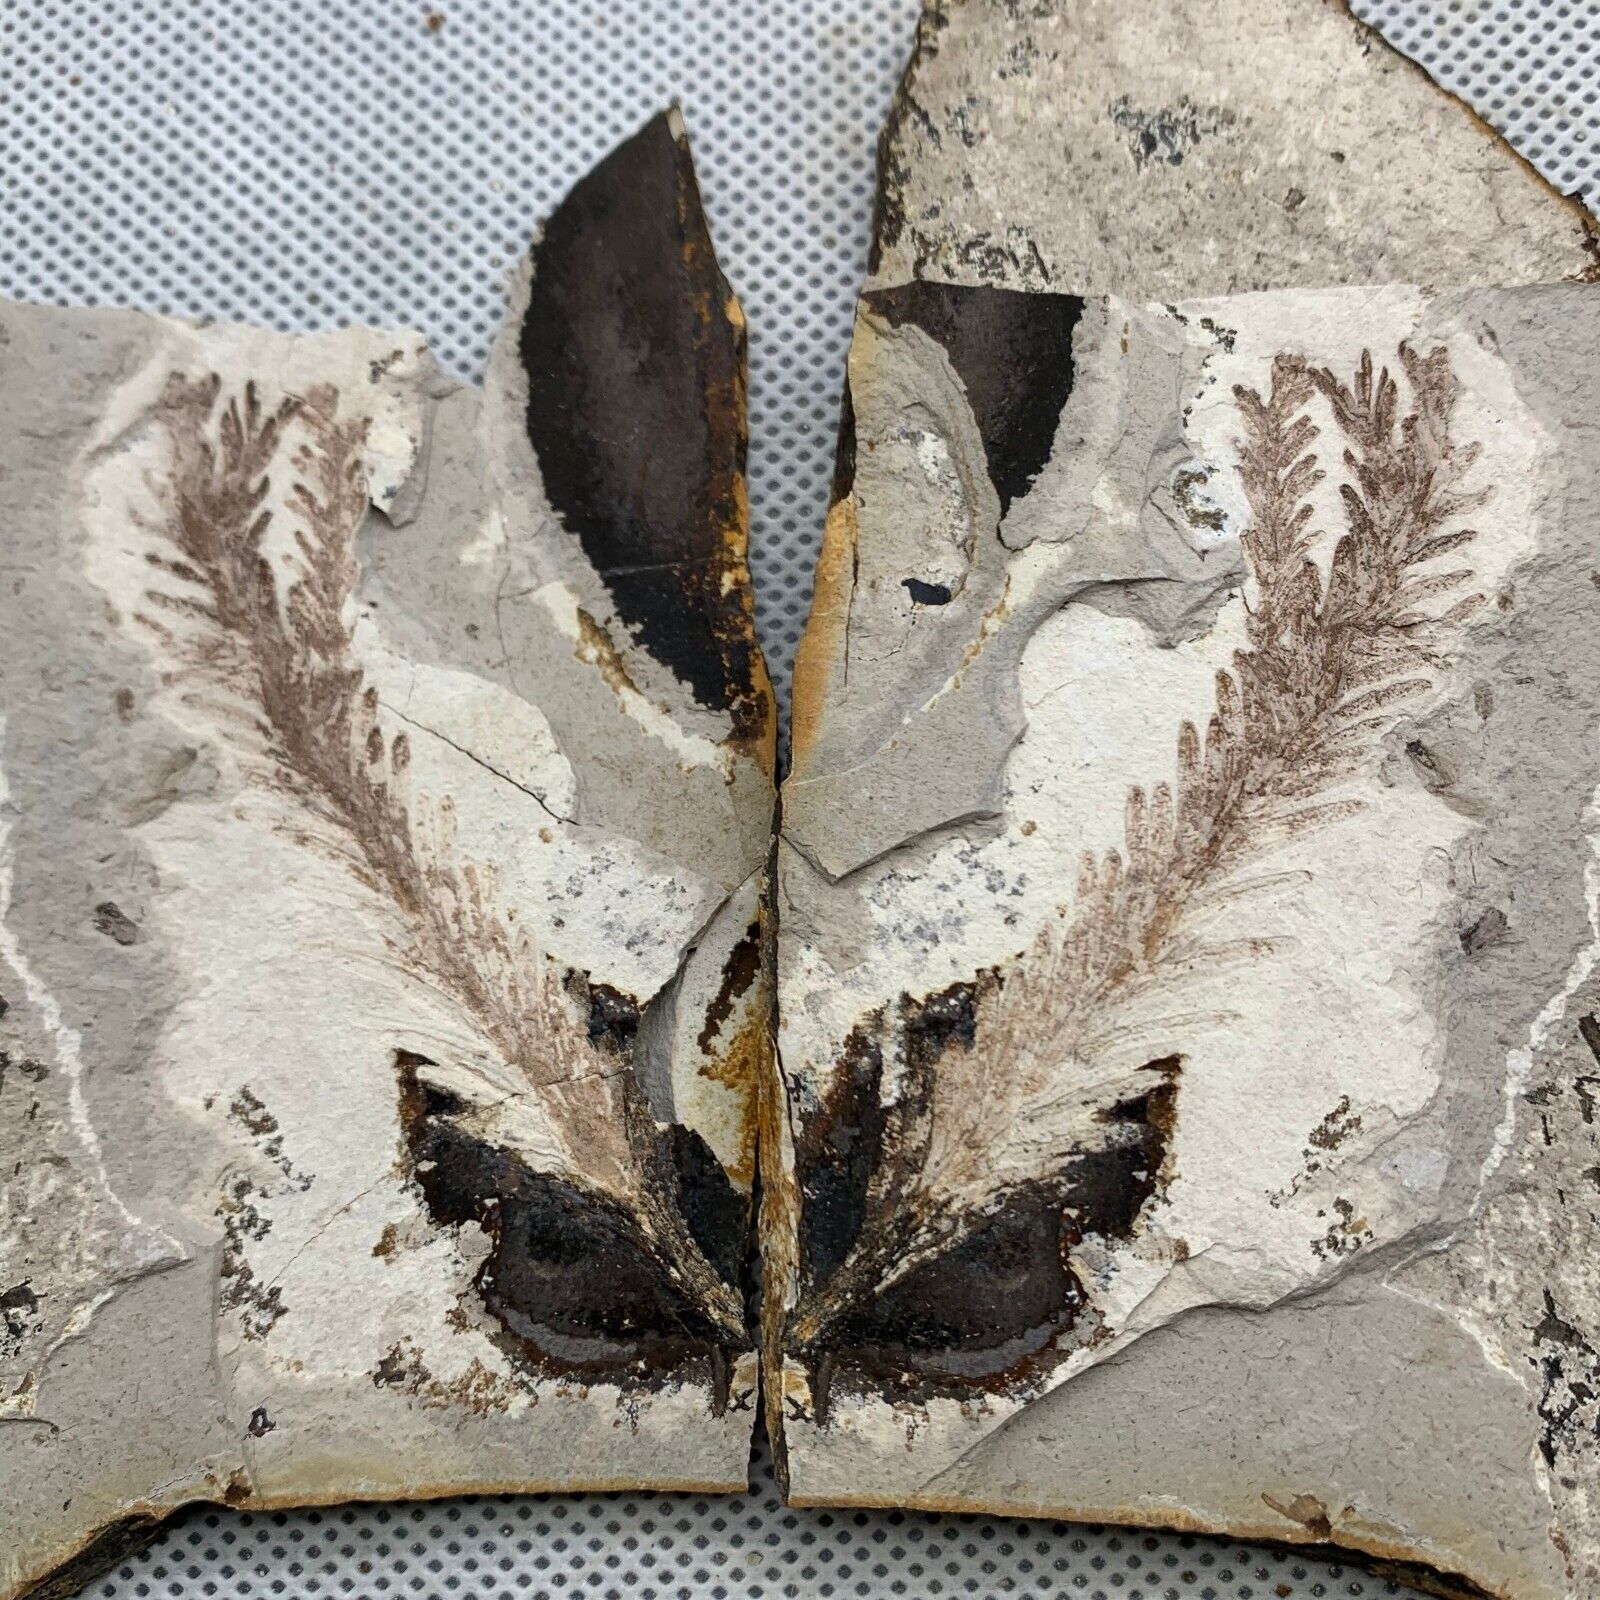 A pair of exquisite plant fossils from the Jurassic Daohugou period